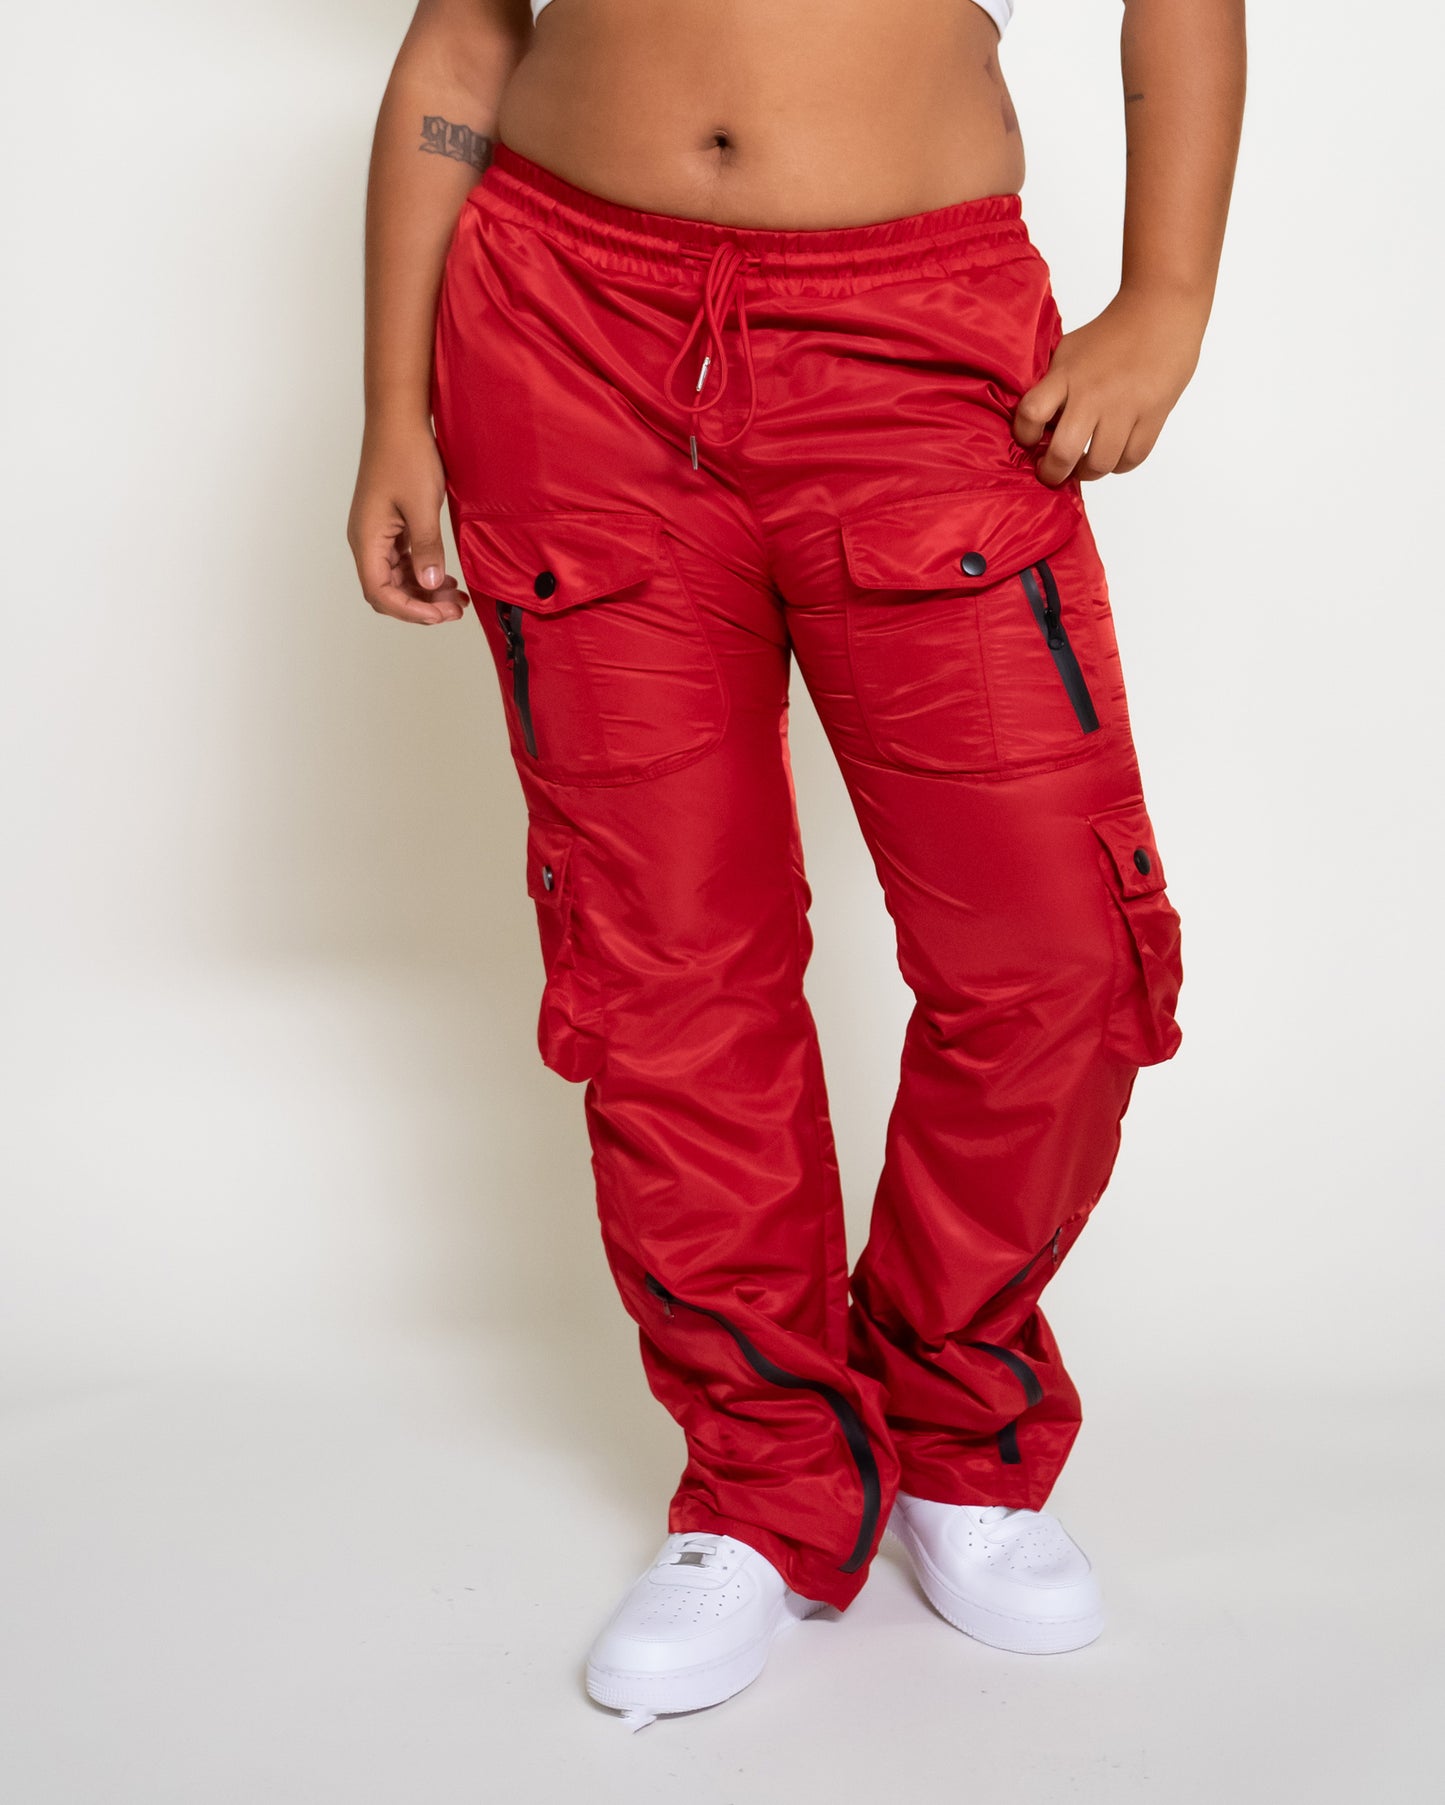 EPTM DOUBLE CARGO PANTS-RED